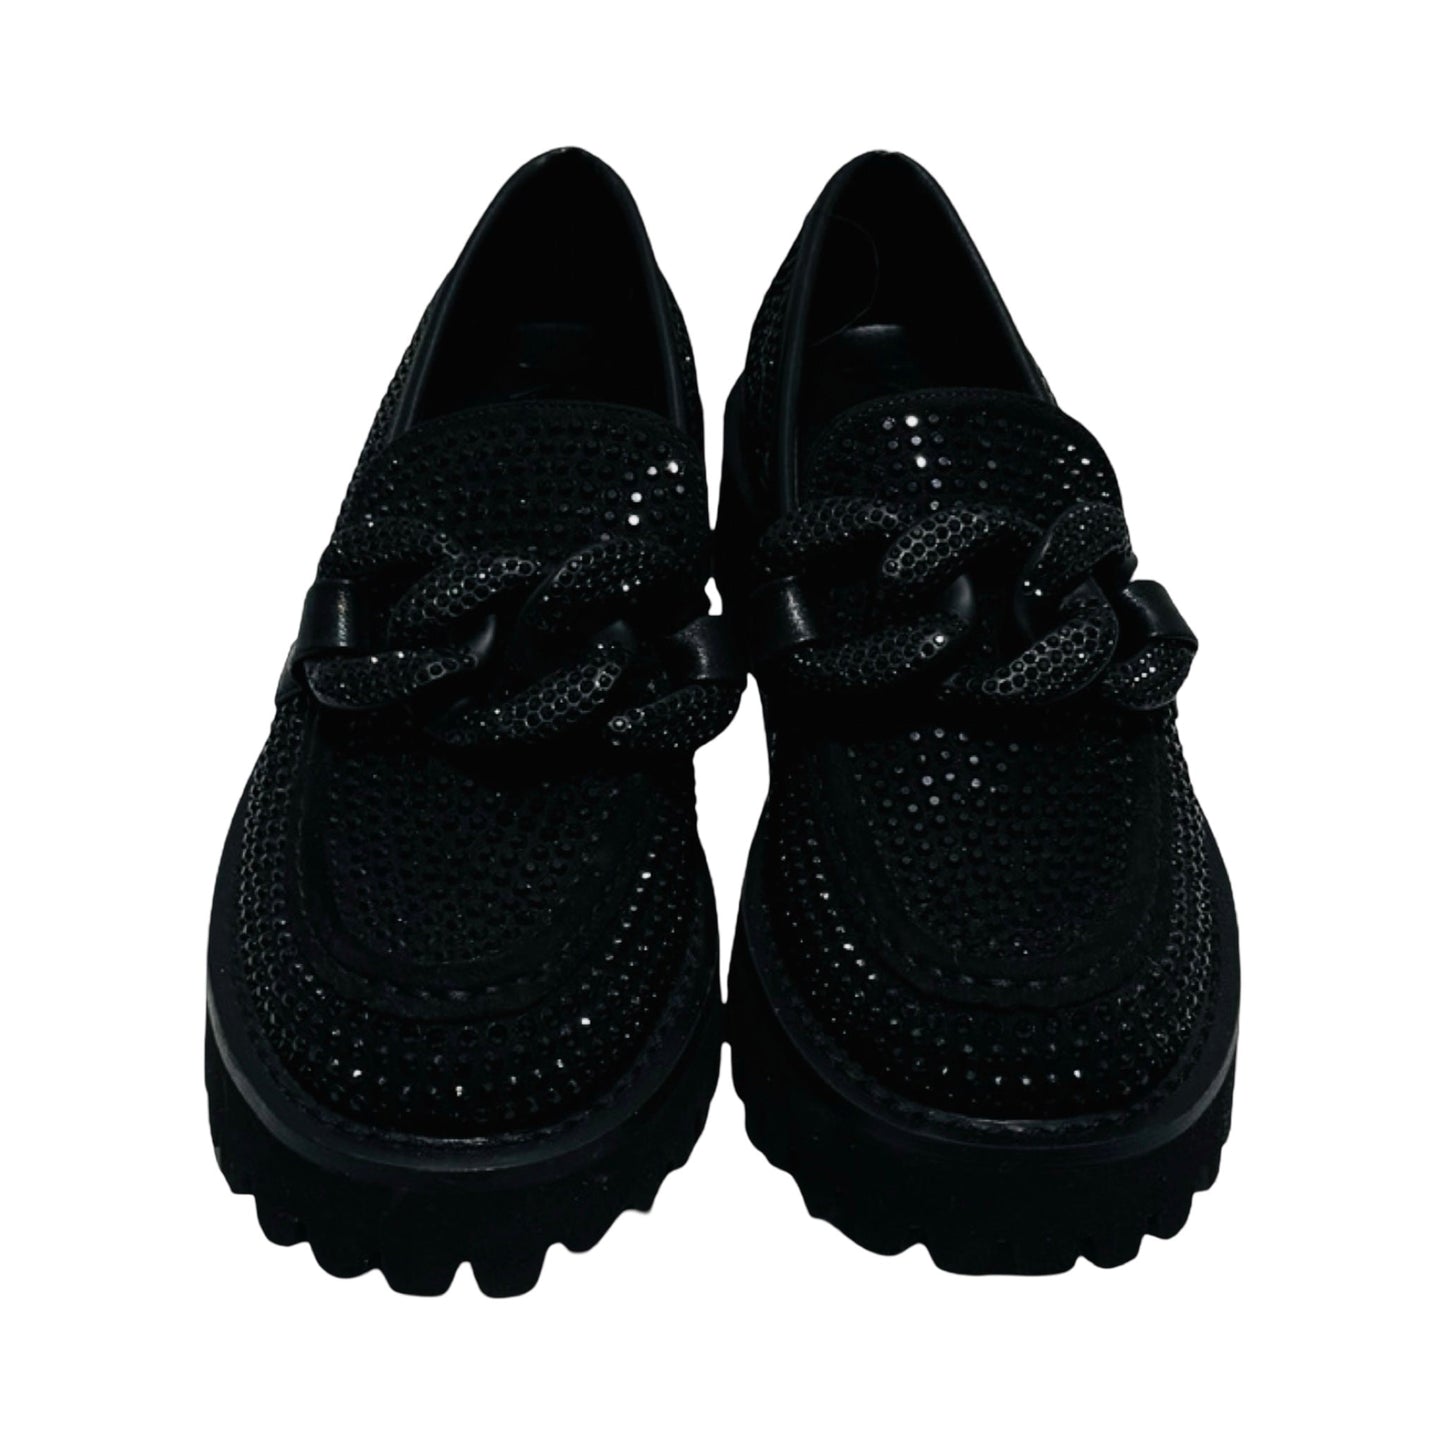 Shoes Sneakers Platform By Karl Lagerfeld  Size: 6.5